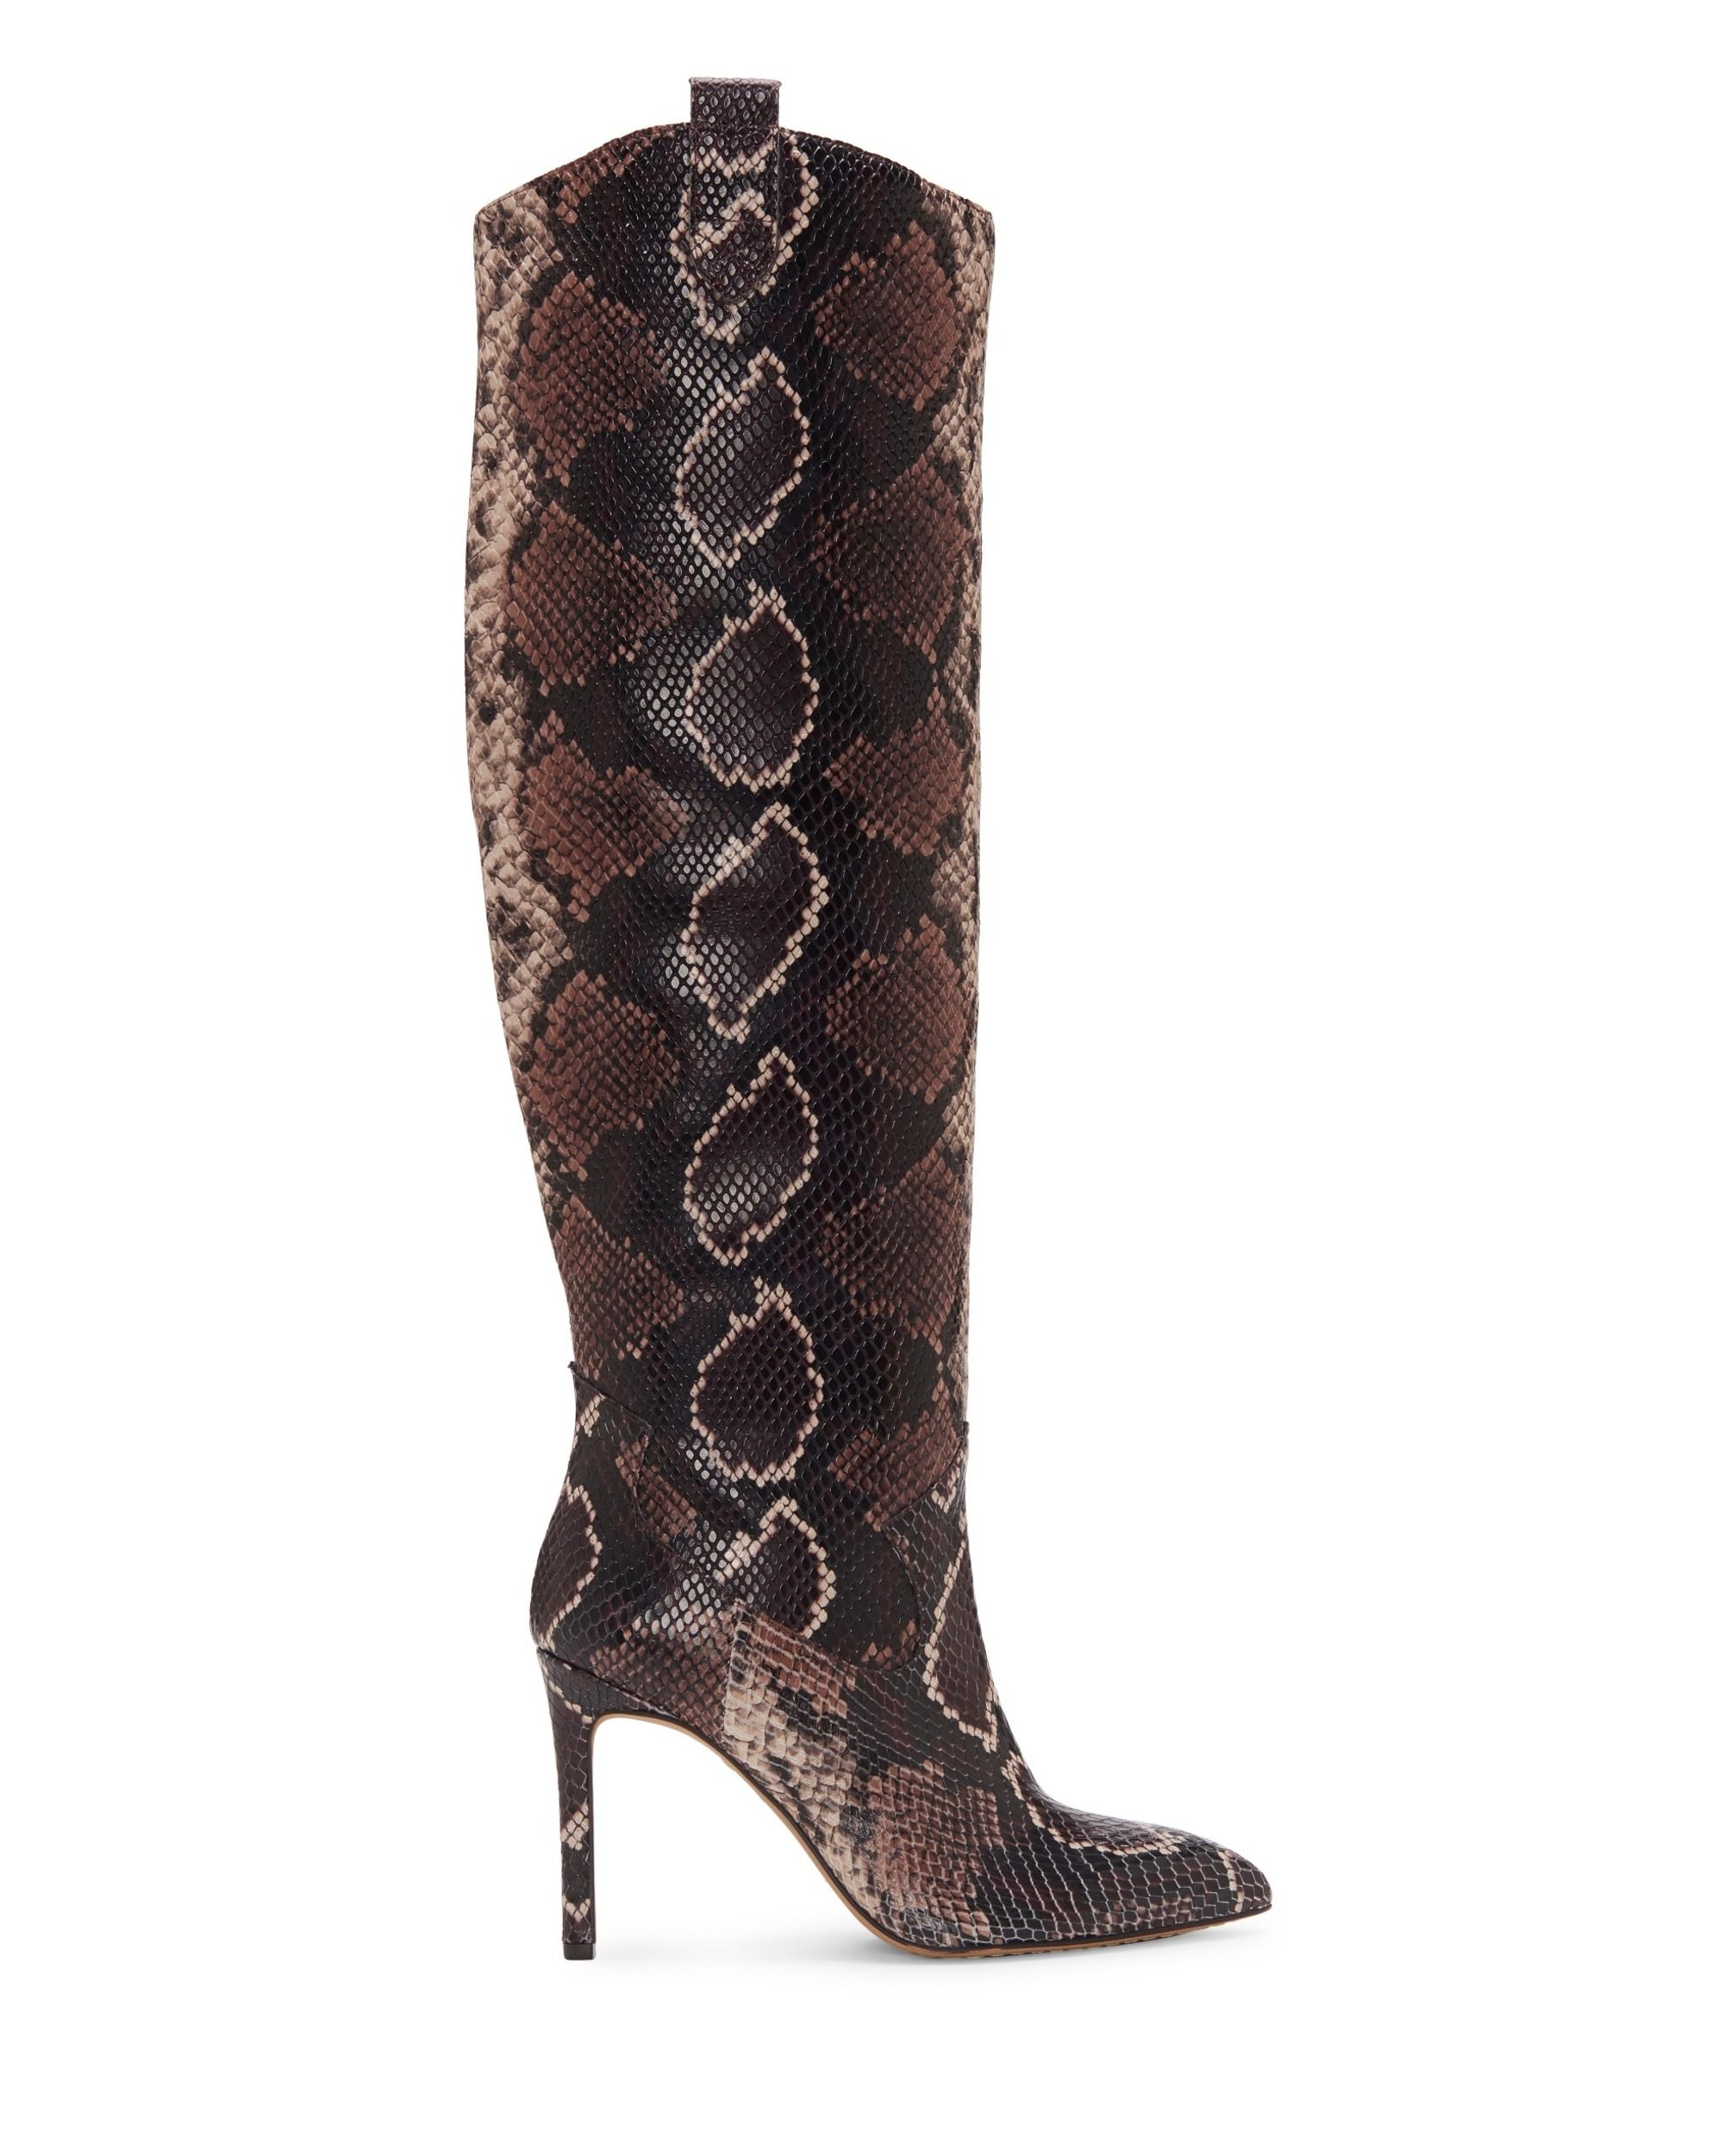 vince camuto snake boots